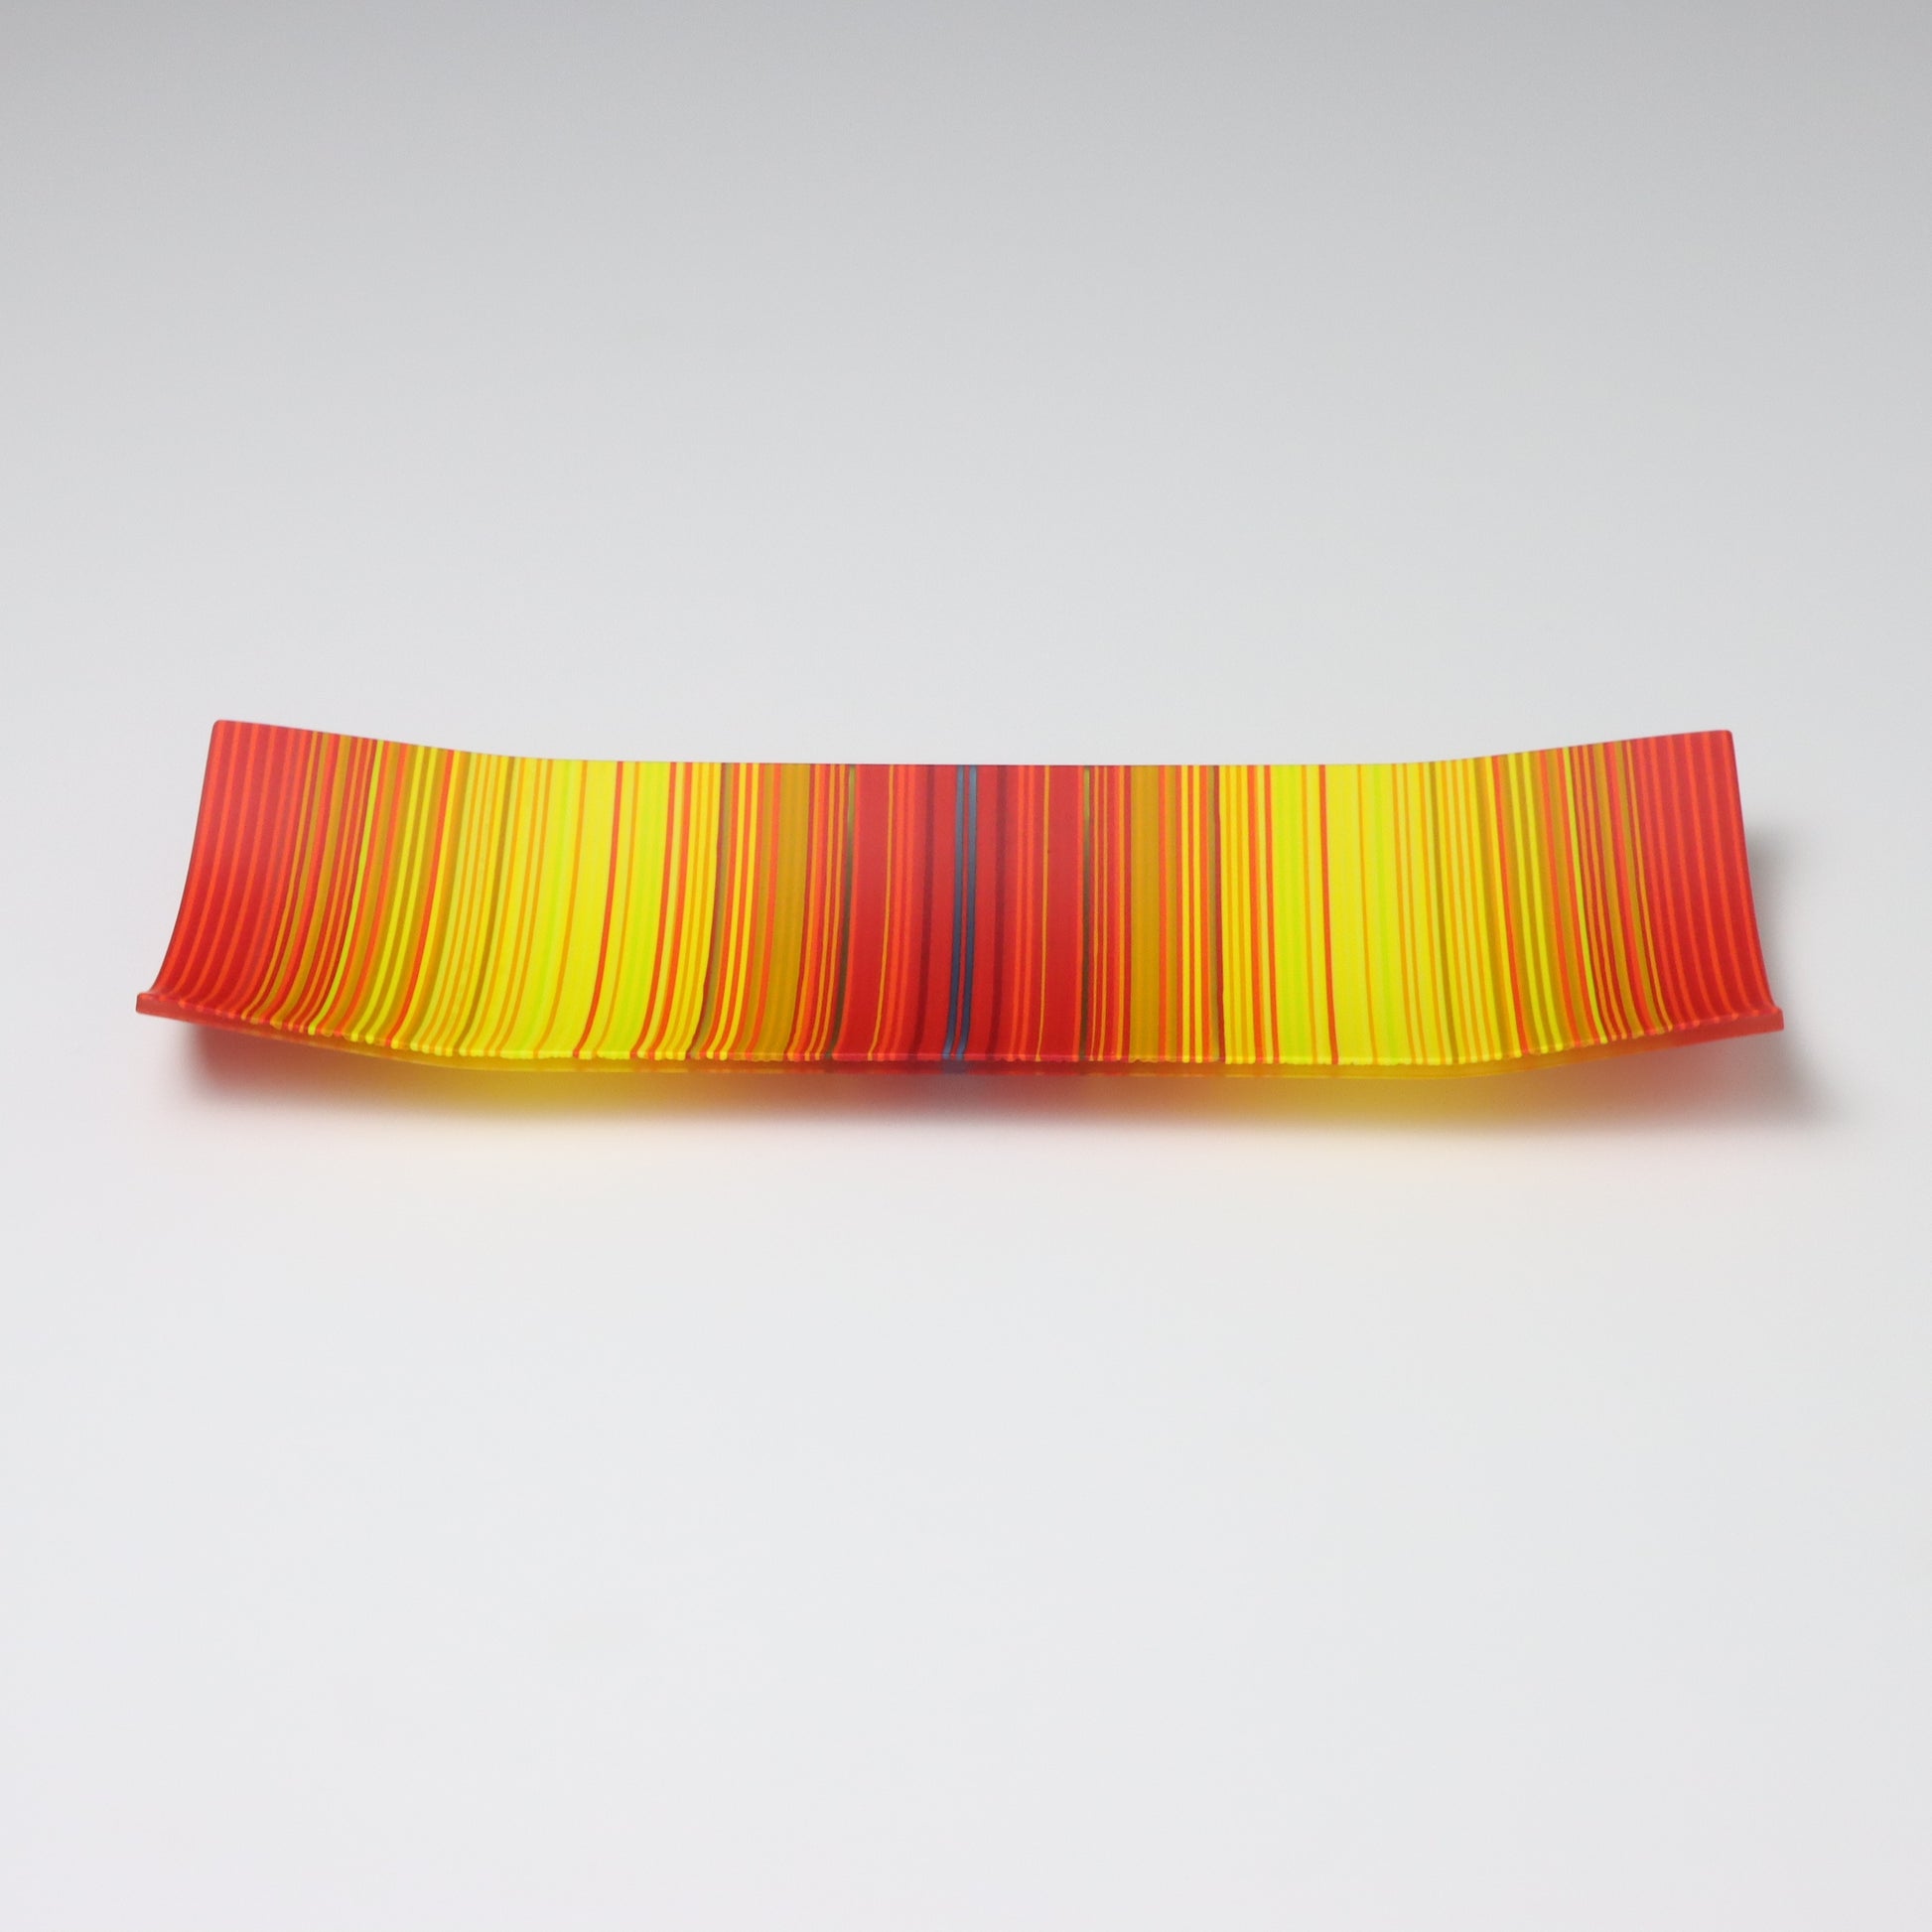 A captivating ColourWave Glass fused glass plate, showcasing a vibrant colour gradient that transitions between bright red to bright yellow. The plate’s rectangular shape is softened by the corners that curve gently upwards, adding an elegant touch to the design. Set against a neutral grey backdrop, the plate’s rich colours and sleek form are beautifully highlighted.